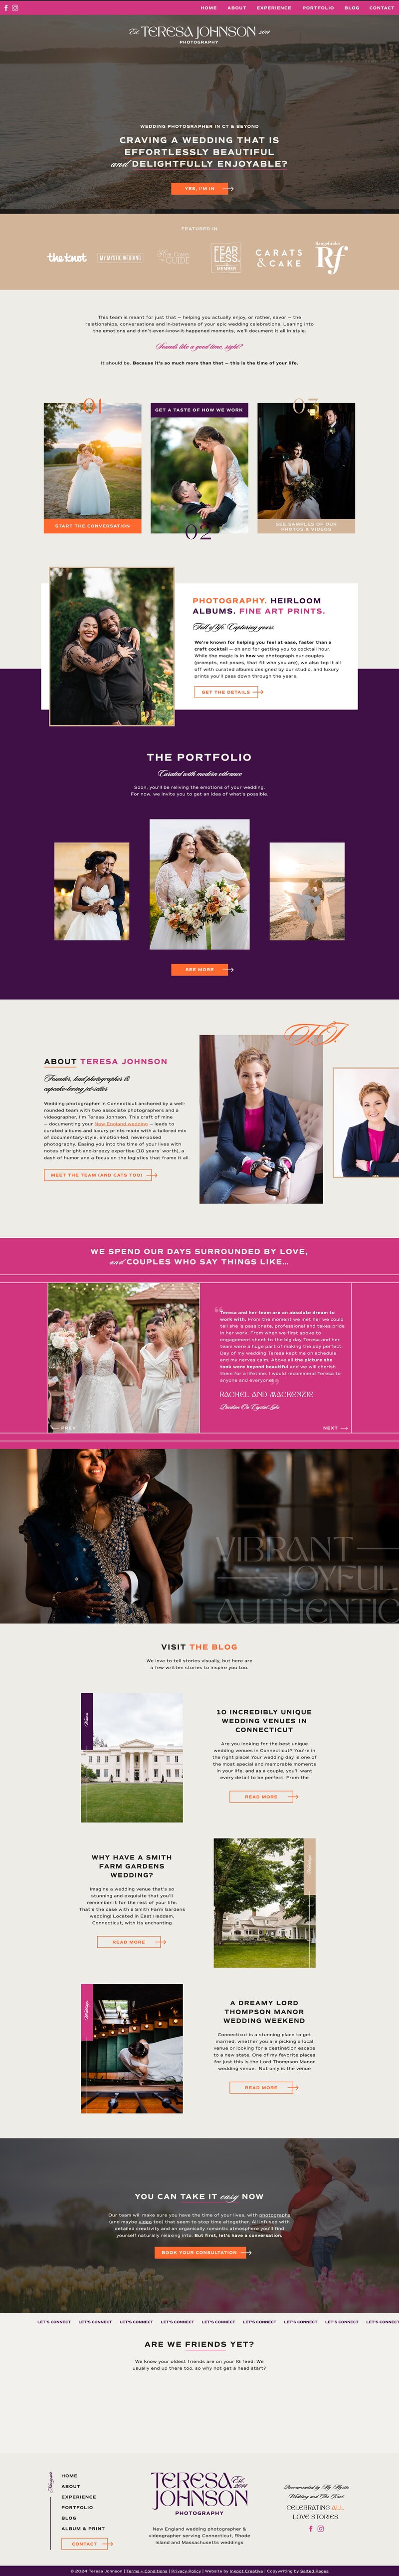 The home page for Teresa Johnson Photography